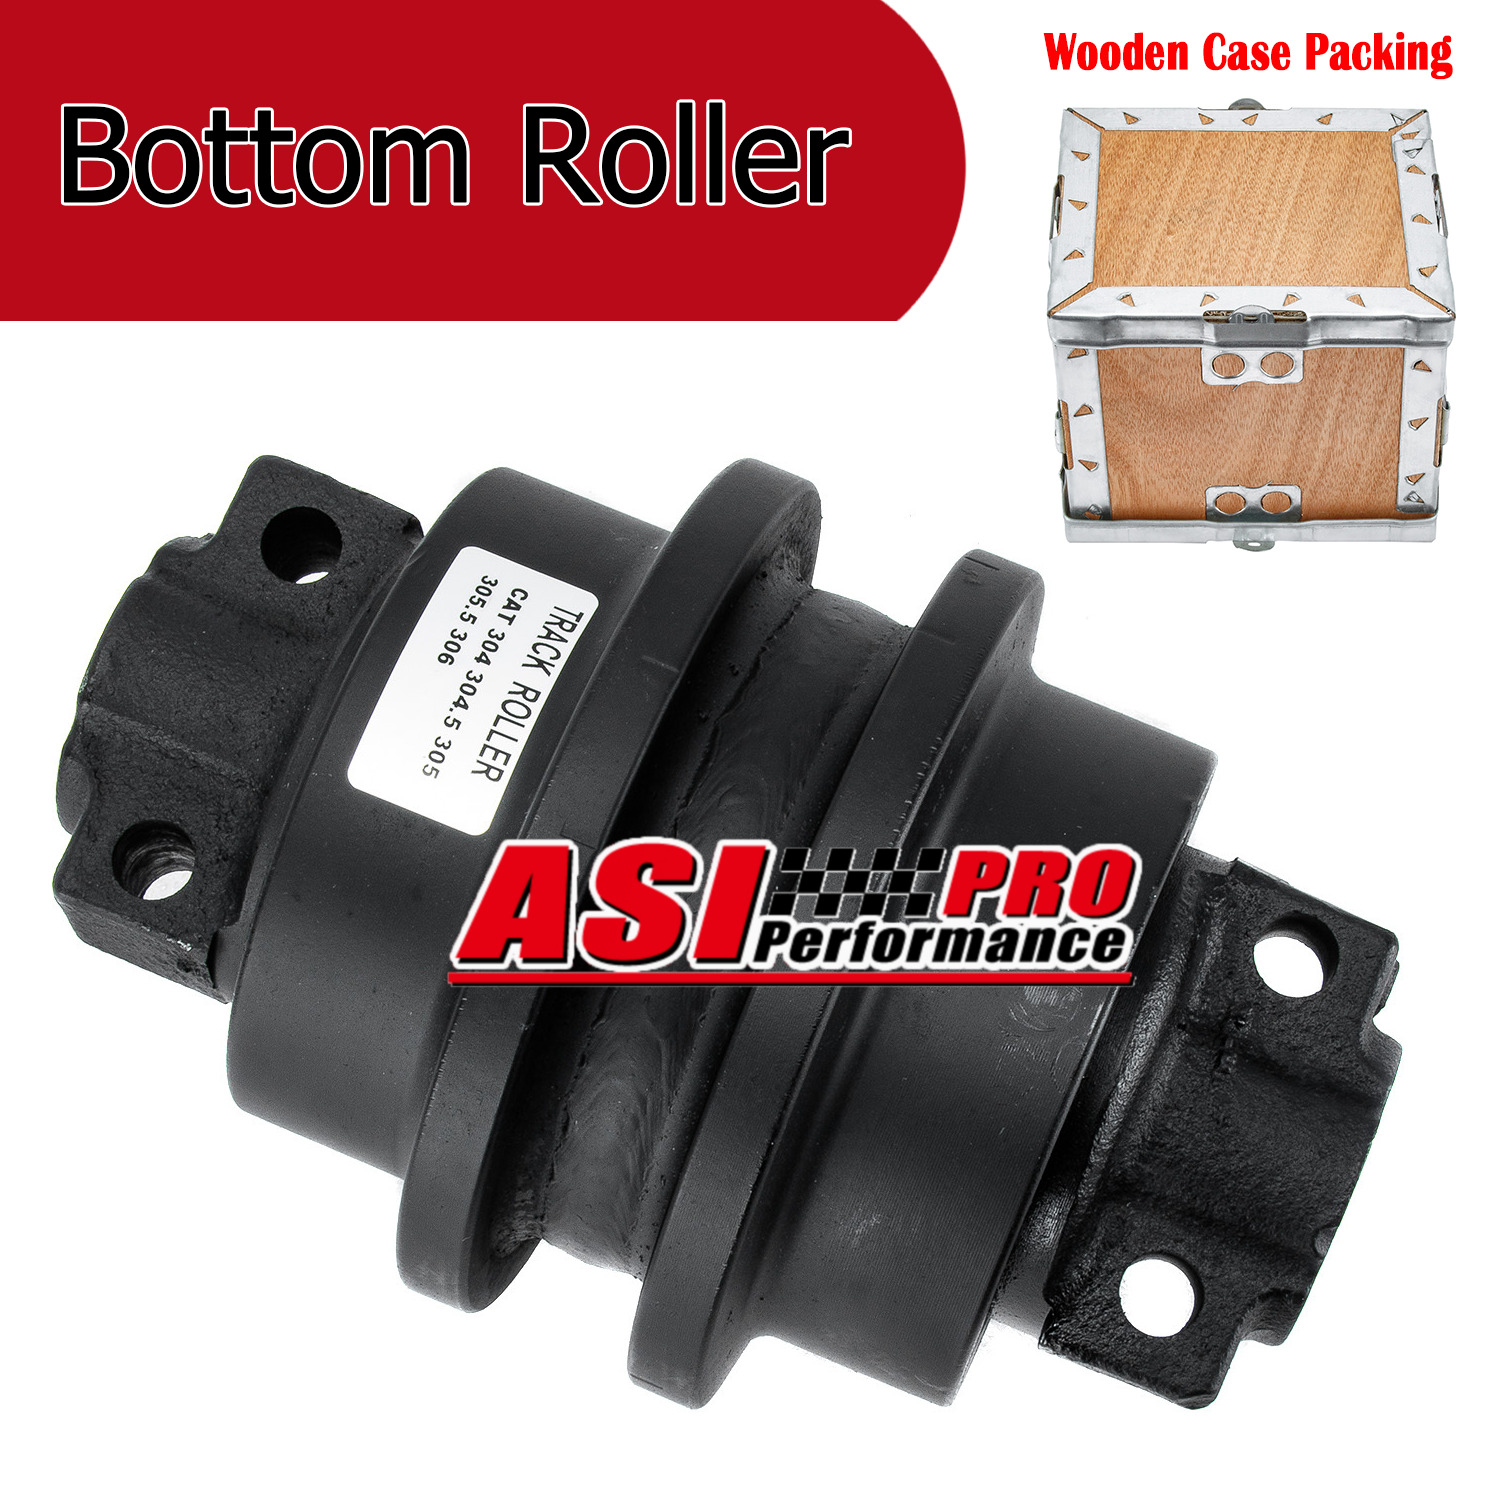 2x Undercarriage Track Bottom Roller for Caterpillar Cat 304 304.5 305 305.5 306